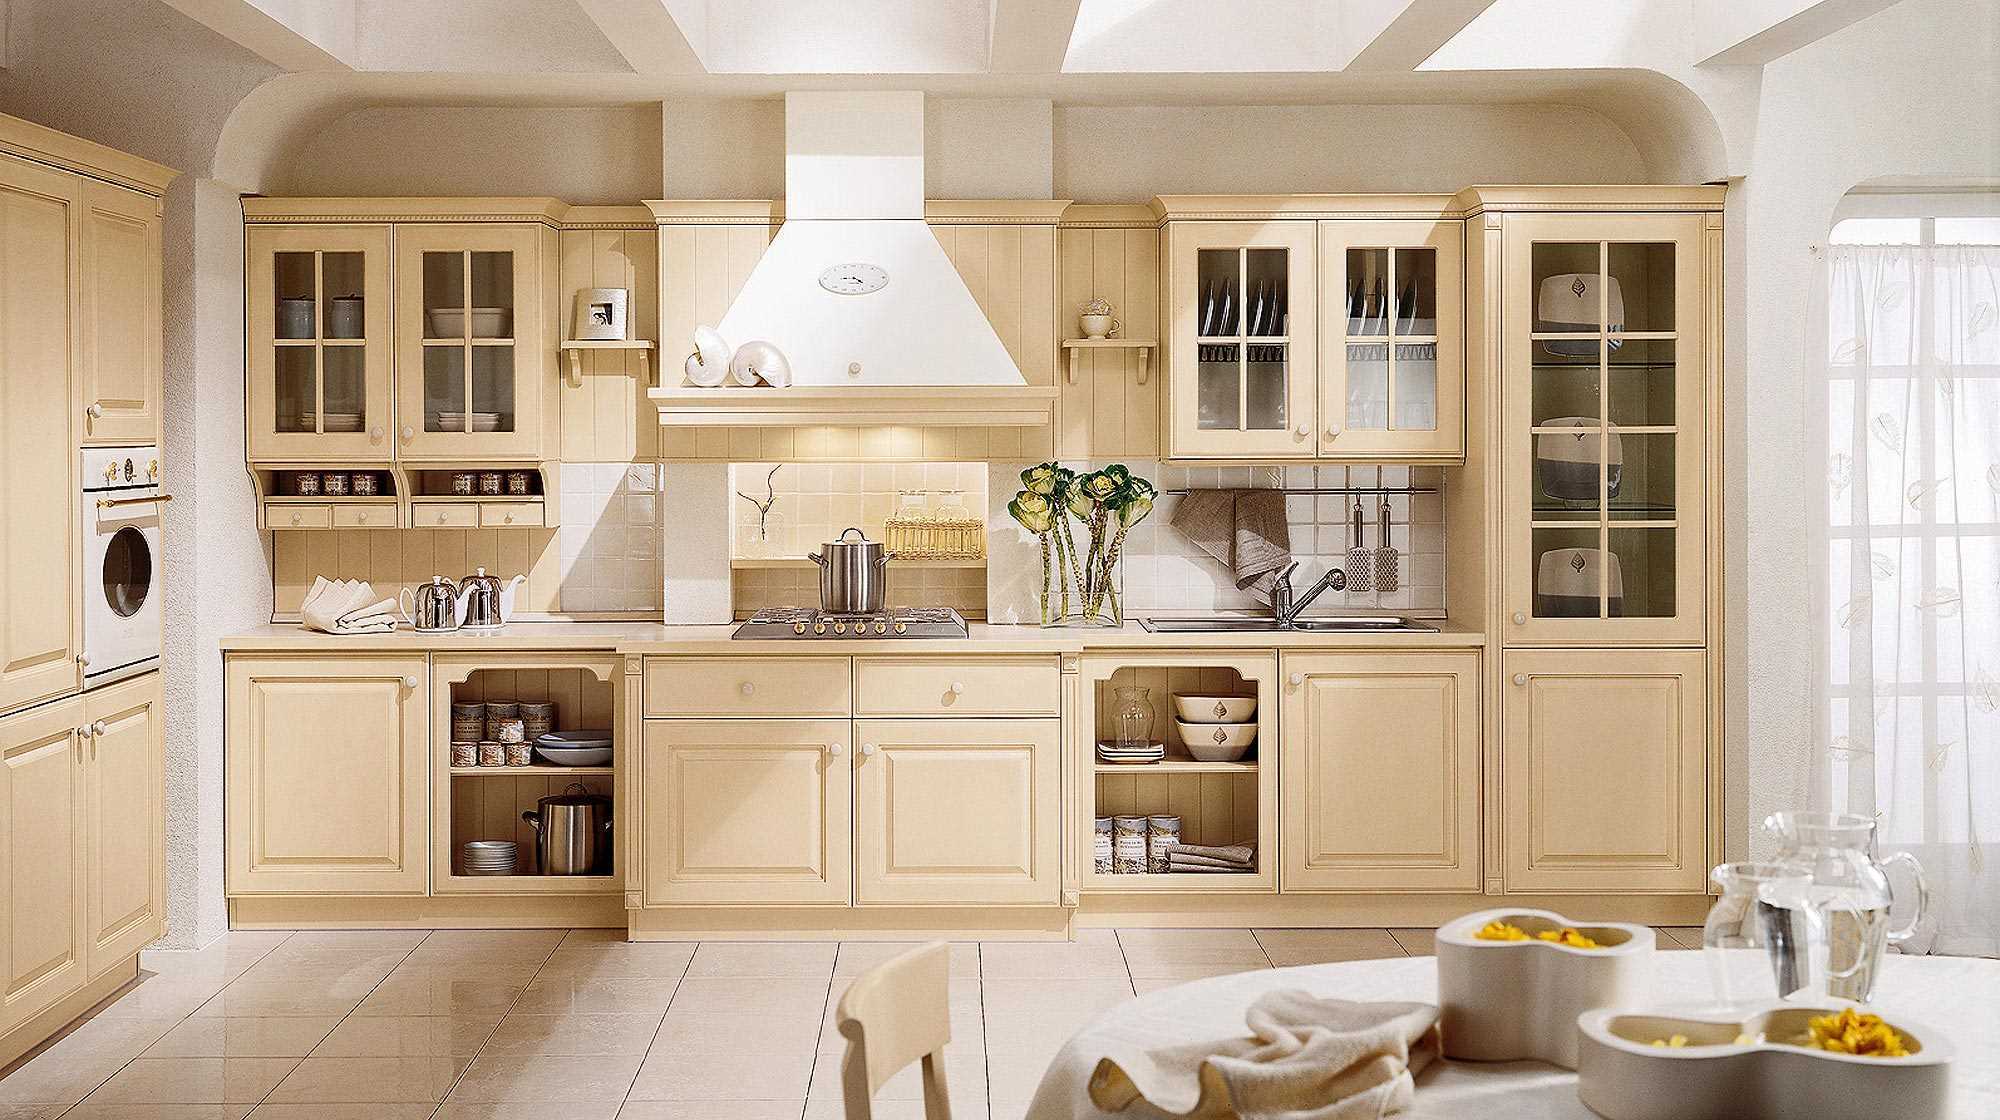 variant of interesting beige color in the style of the apartment